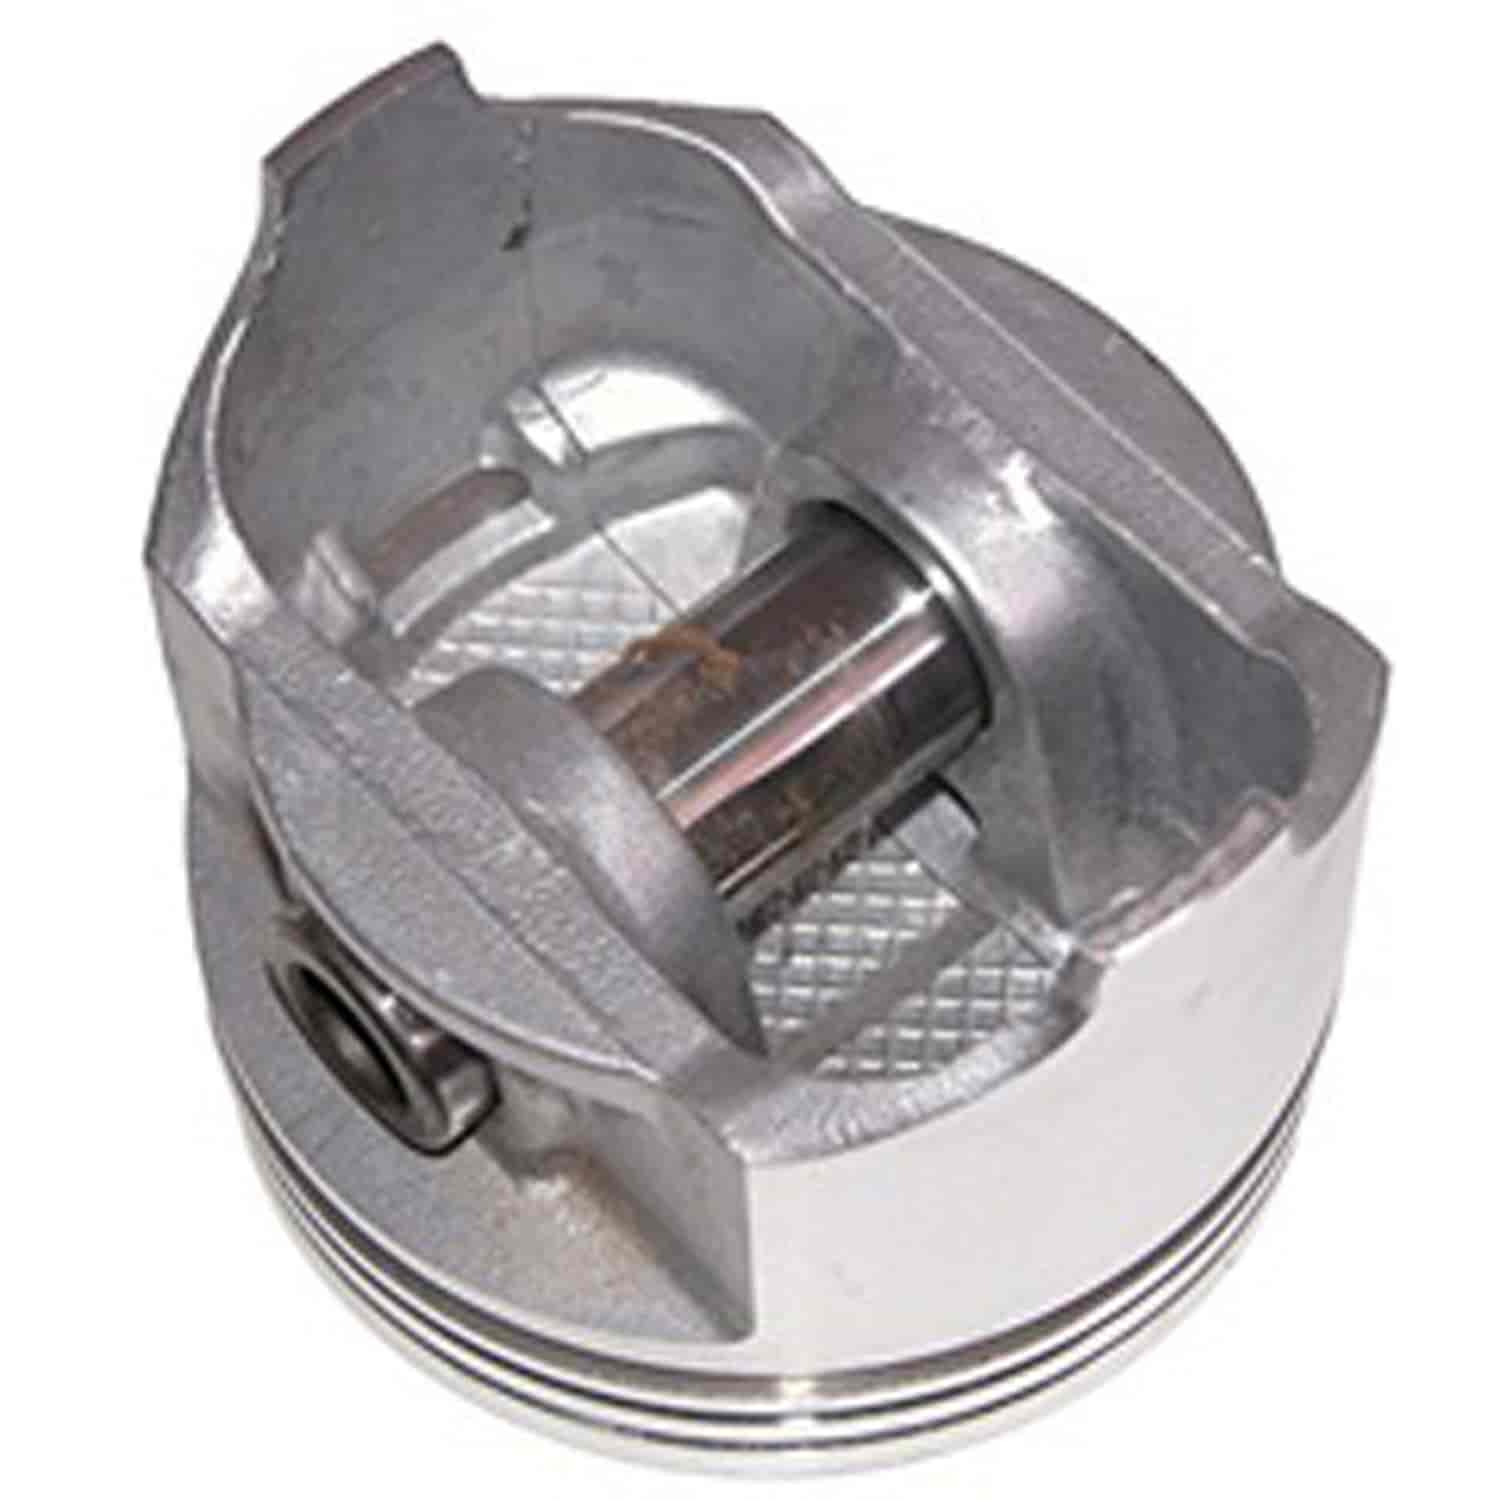 This standard piston from Omix-ADA fits the 5.9L